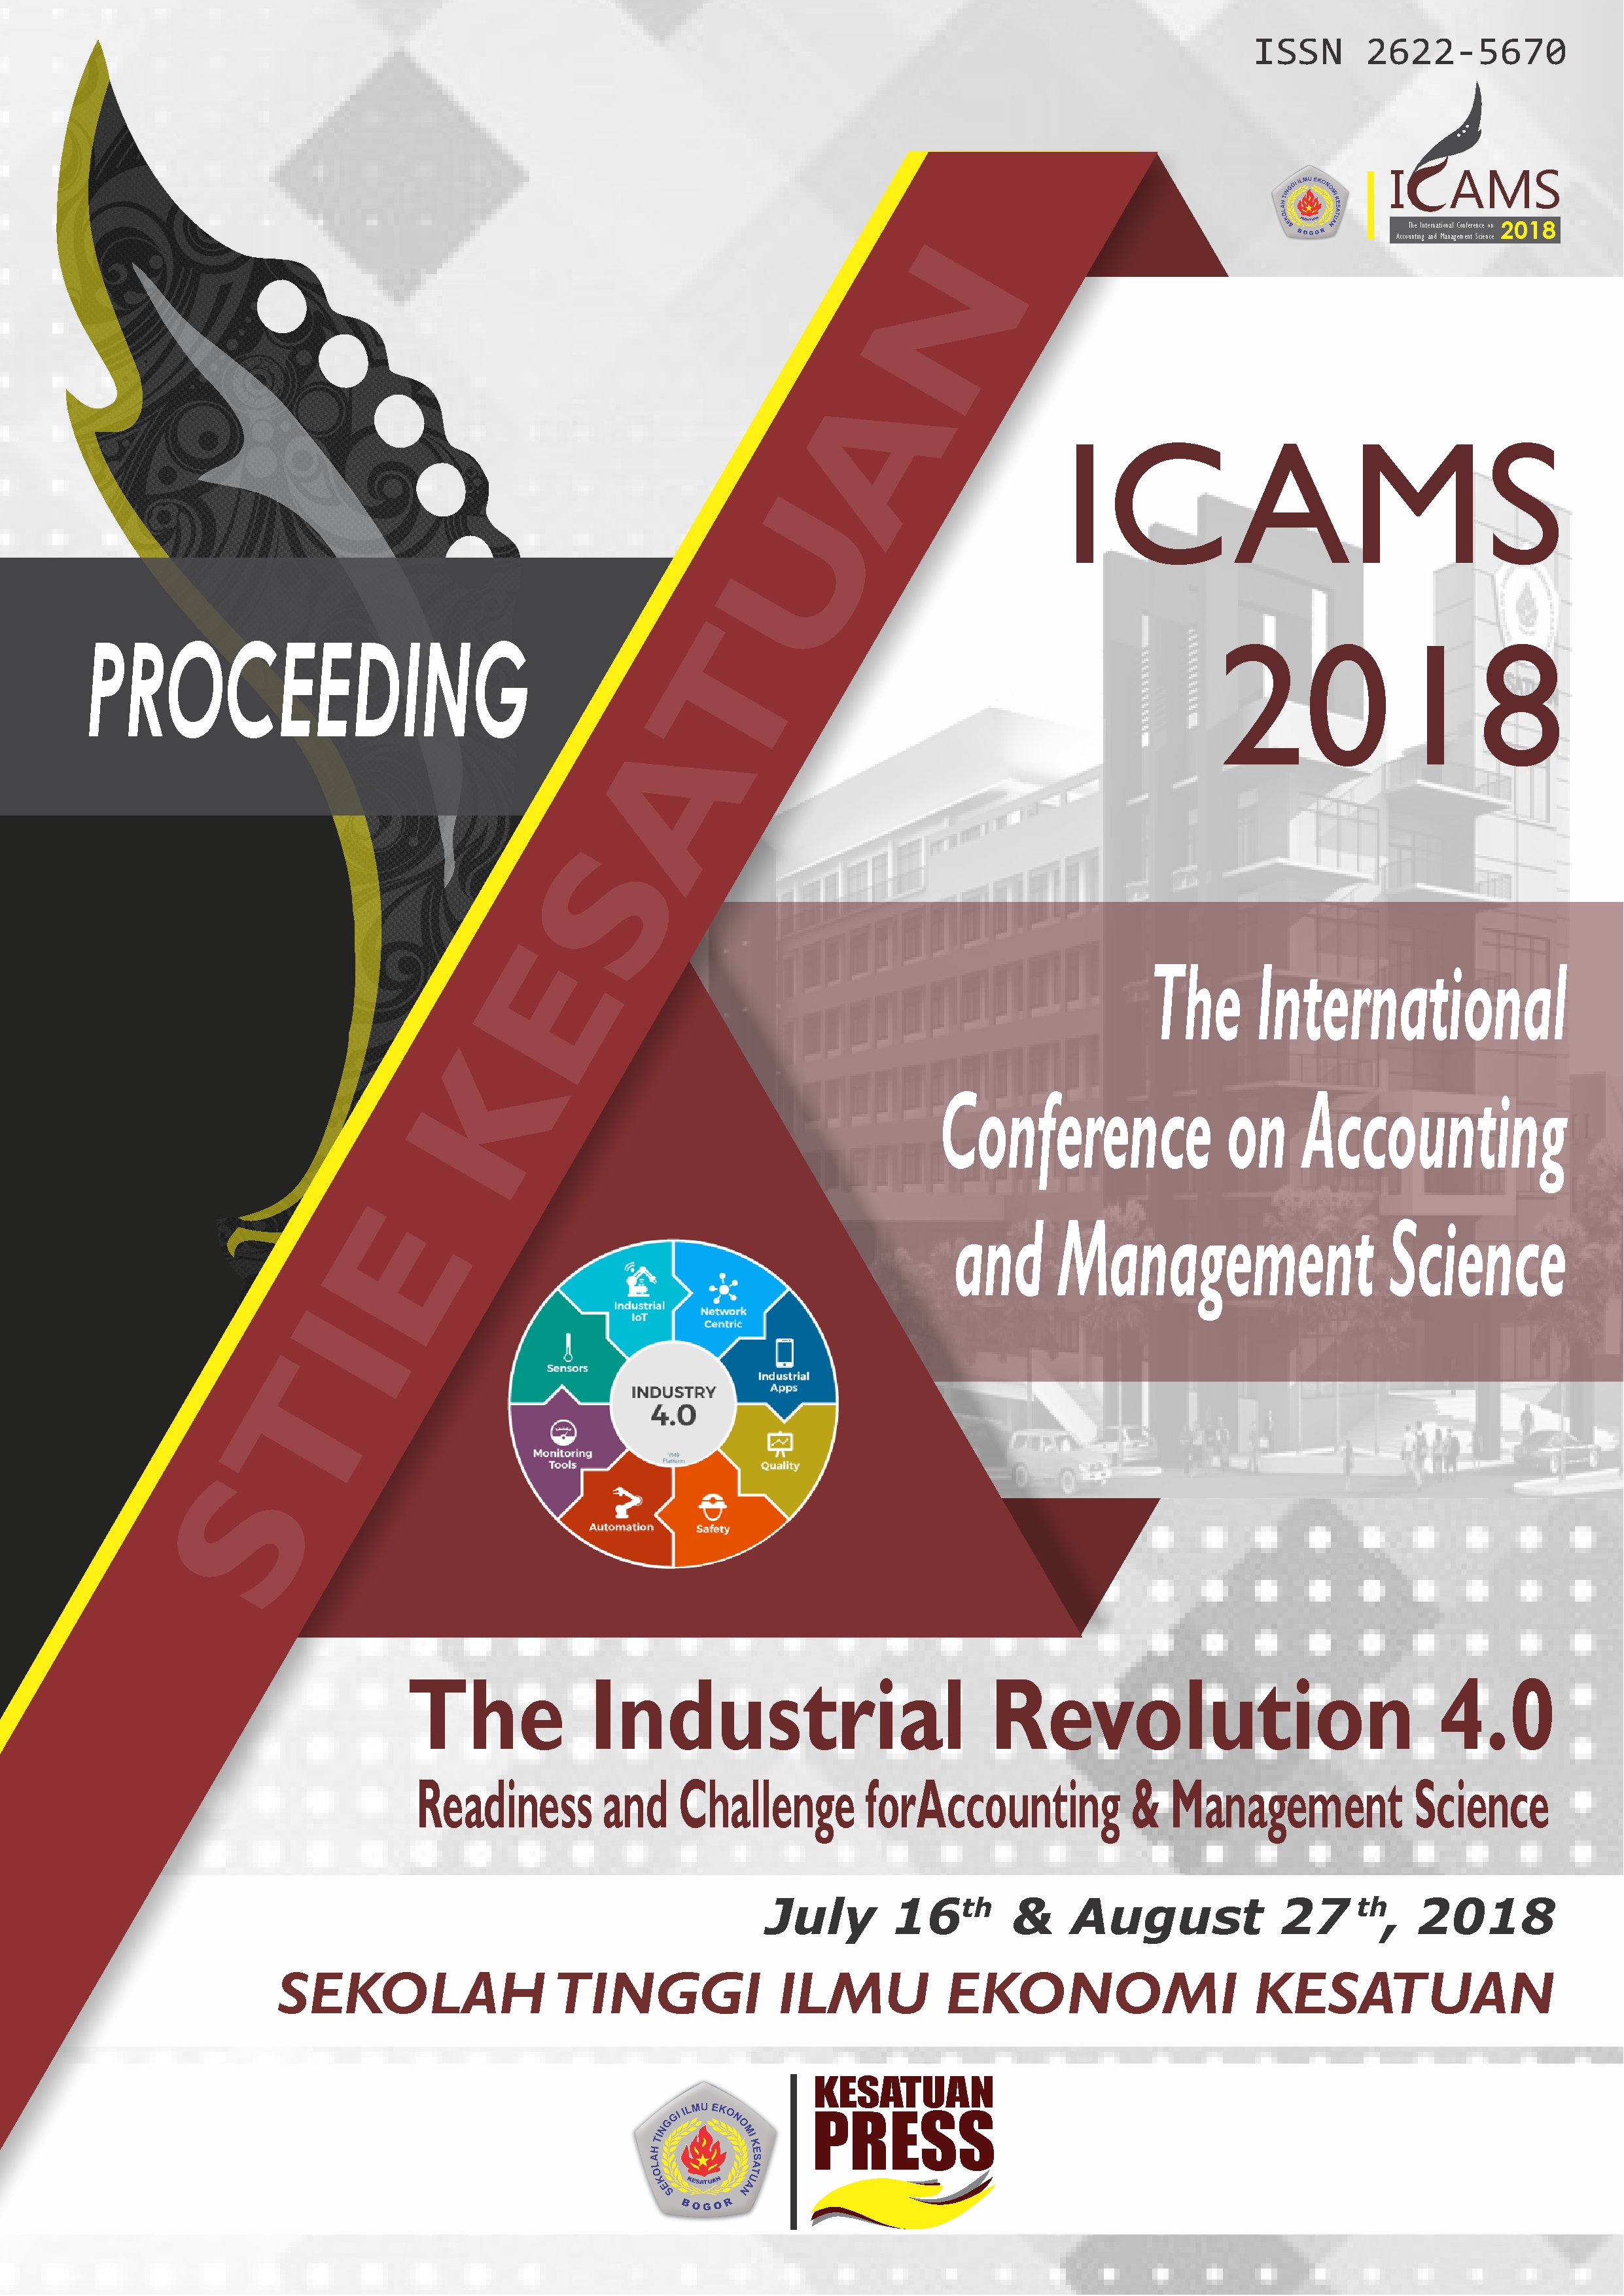 					View 2018: PROCEEDING OF THE INTERNATIONAL CONFERENCE ON ACCOUNTING AND MANAGEMENT SCIENCE
				